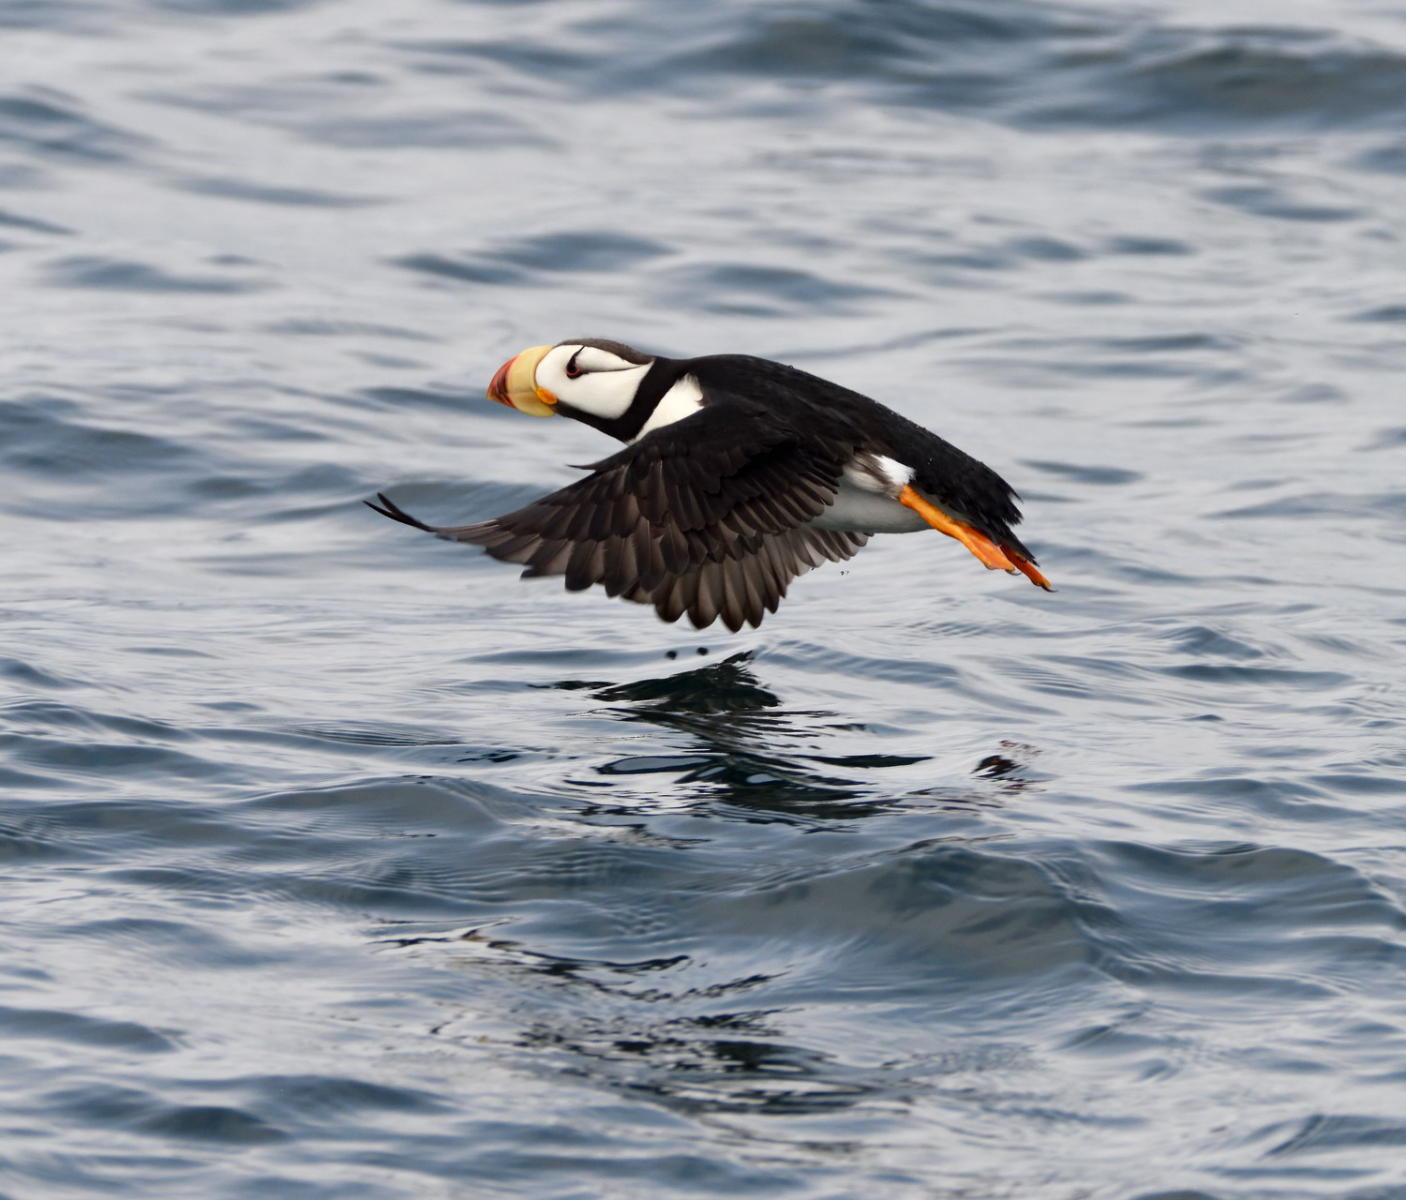 DSC_8266_1A1 - Tufted Puffin